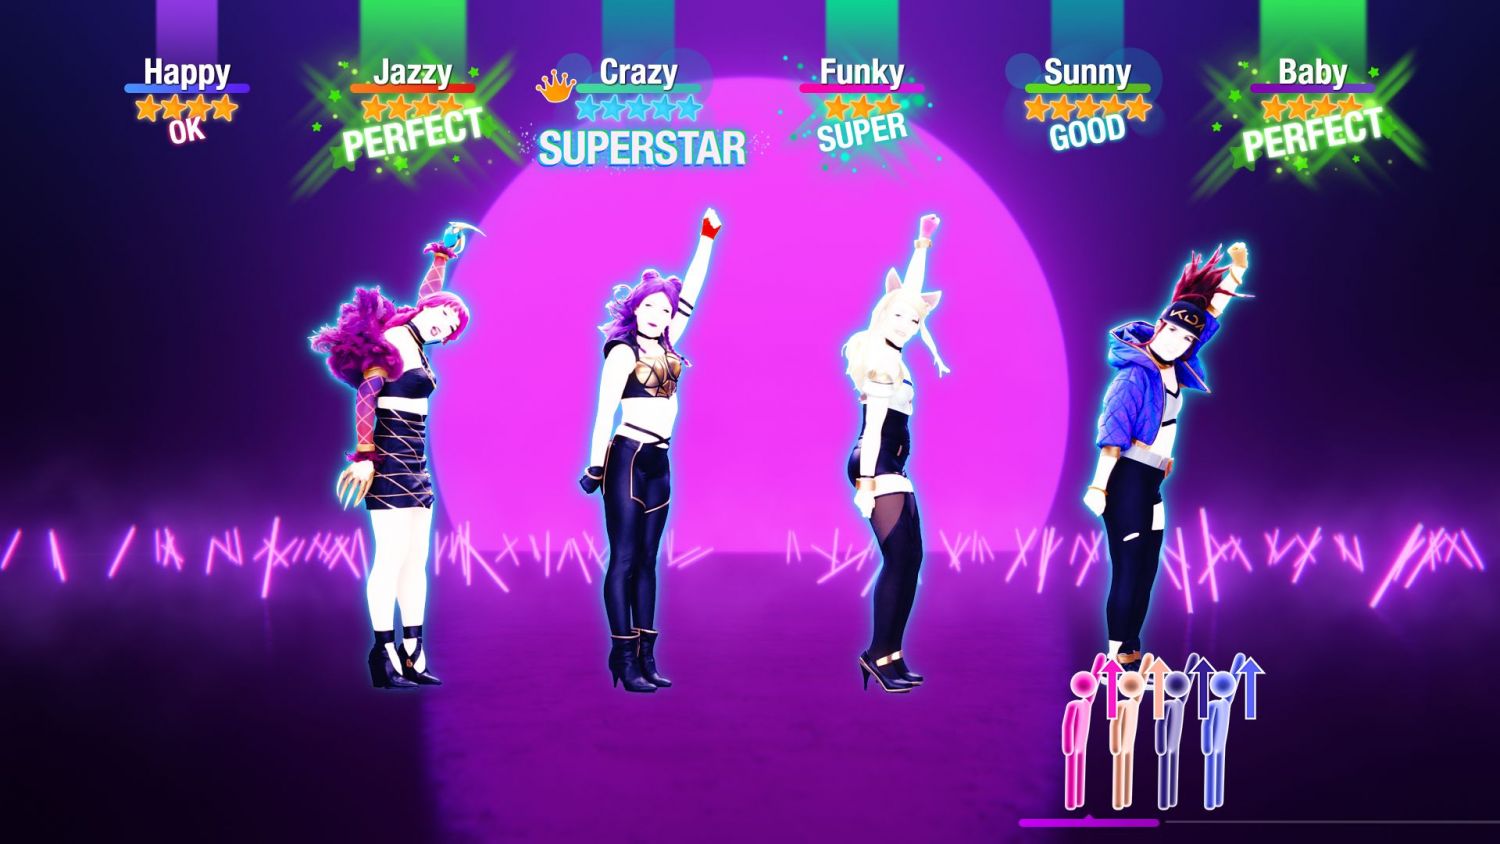 Geek Review: Just Dance 2022 - The biggest hits of the year